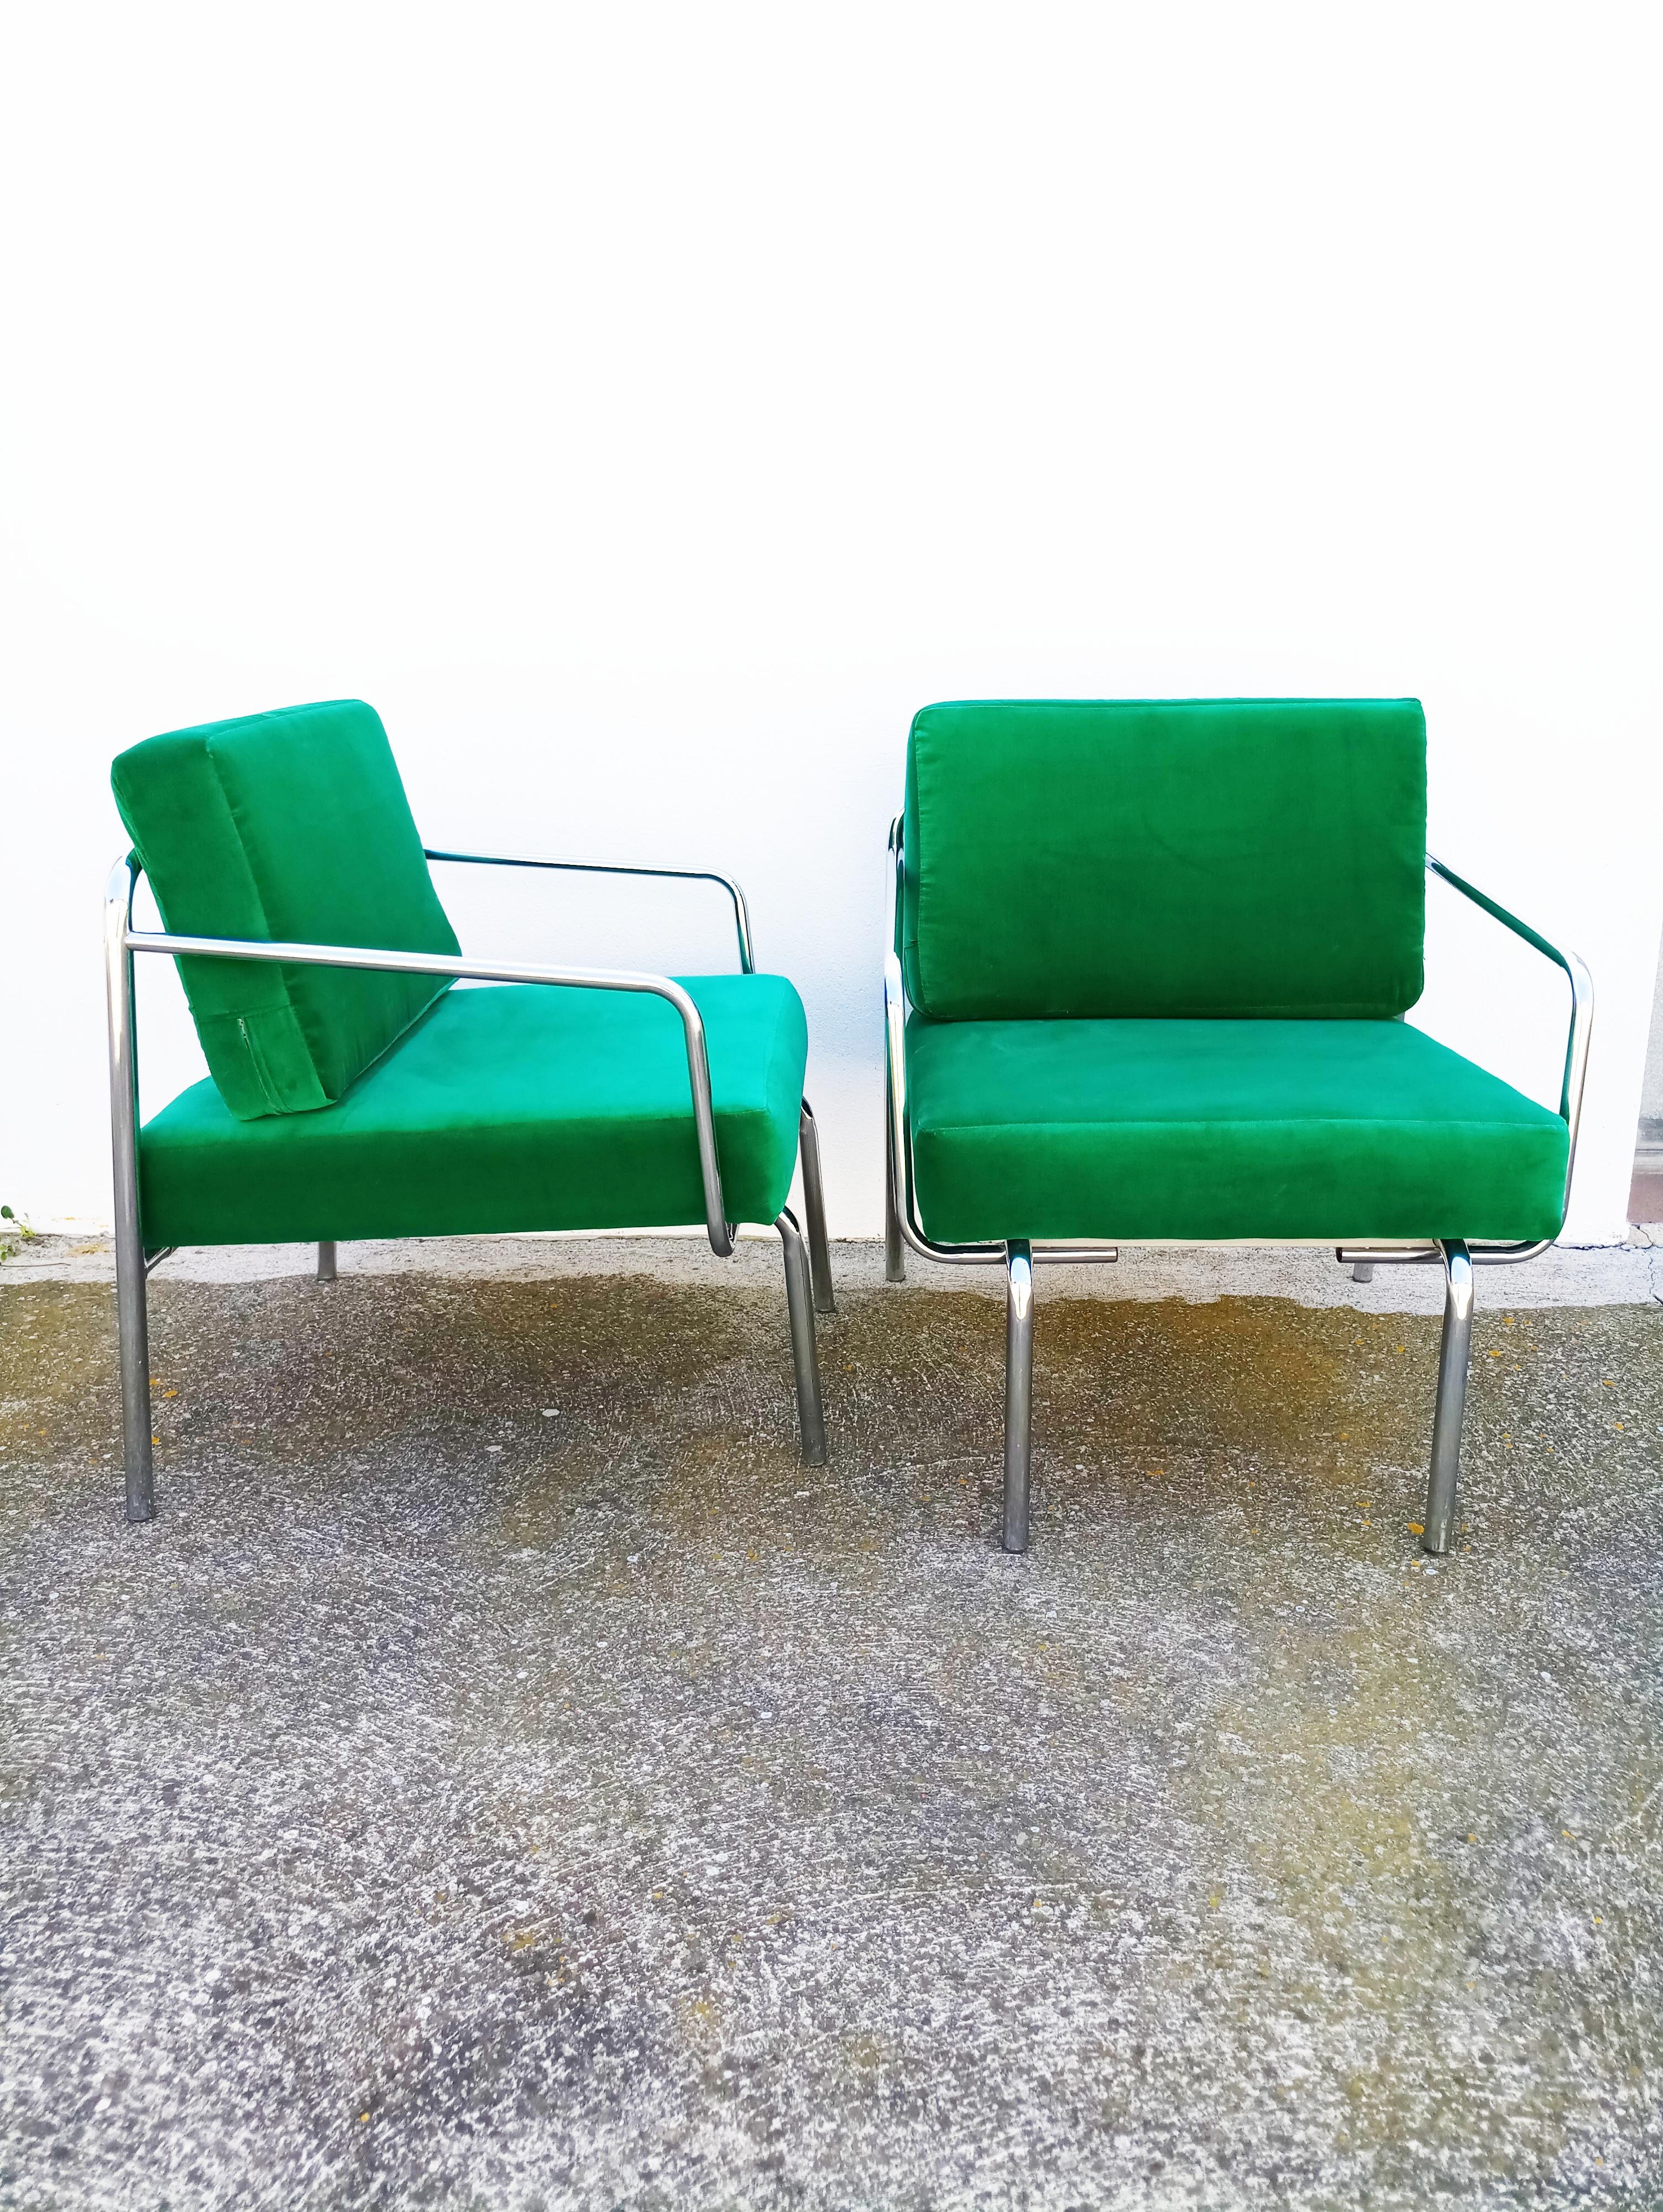 Beautiful and rare pair of 1970s green velvet armchairs manufactured in Italy, green velvet new, foam new, in perfect vintage condition.